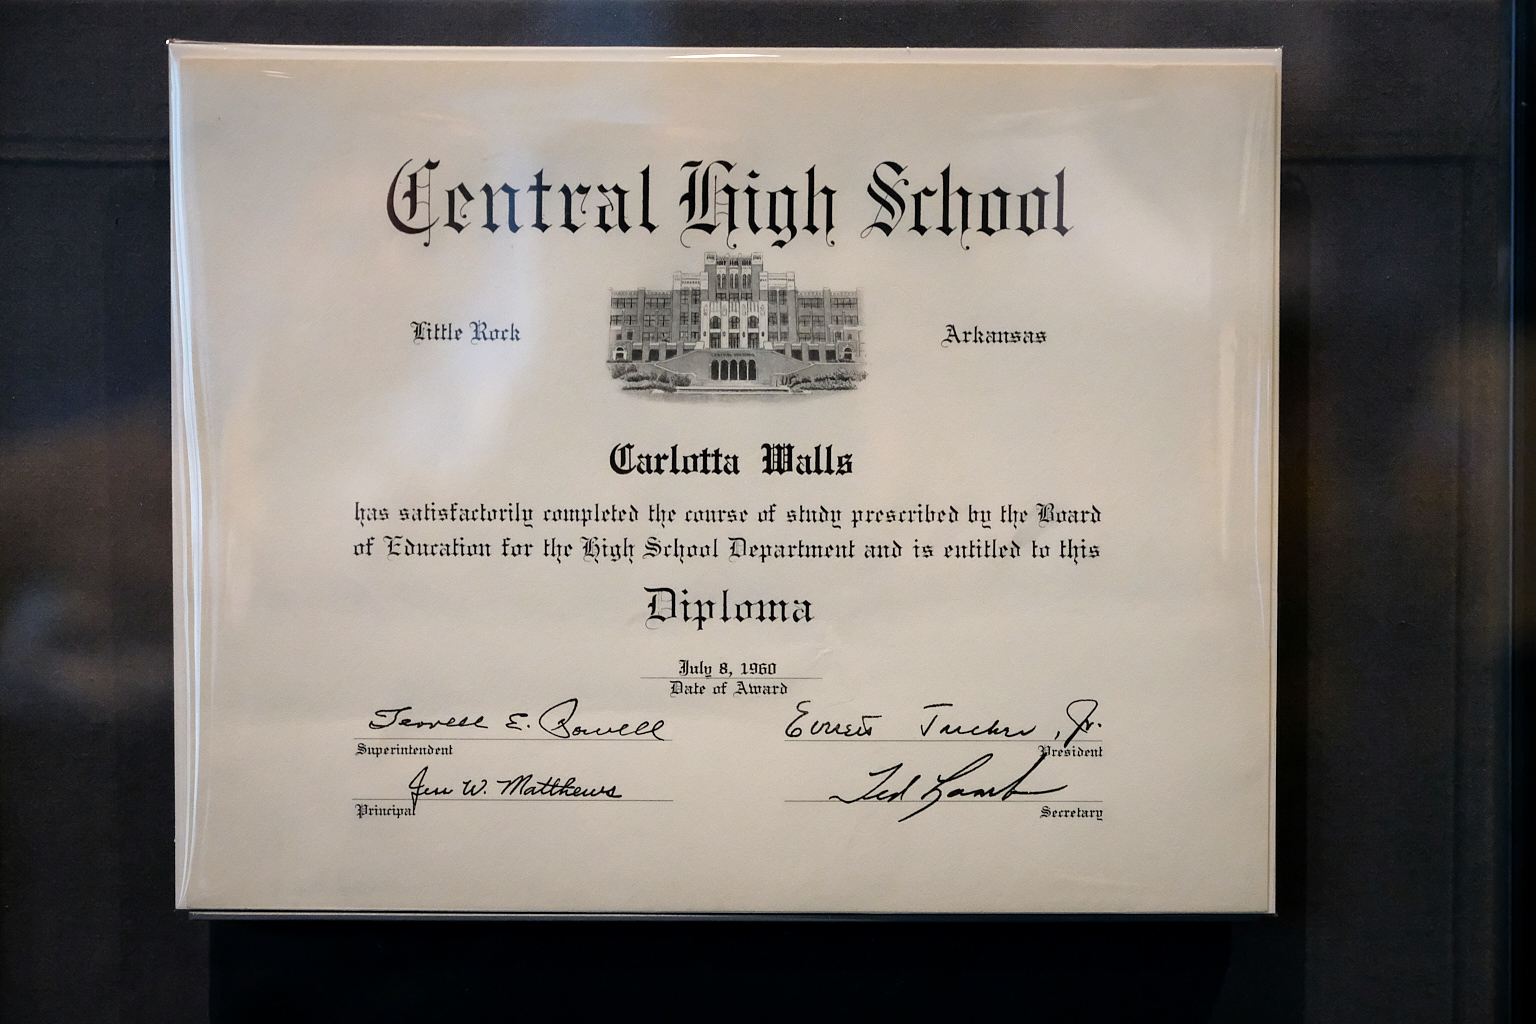  Diploma for Carlotta Walls from Little Rock Central High School. Carlotta Walls LaNier was the youngest of nine high school students, known as the Little Rock Nine, who integrated the formerly all-white Central High School in Little Rock, Arkansas, 